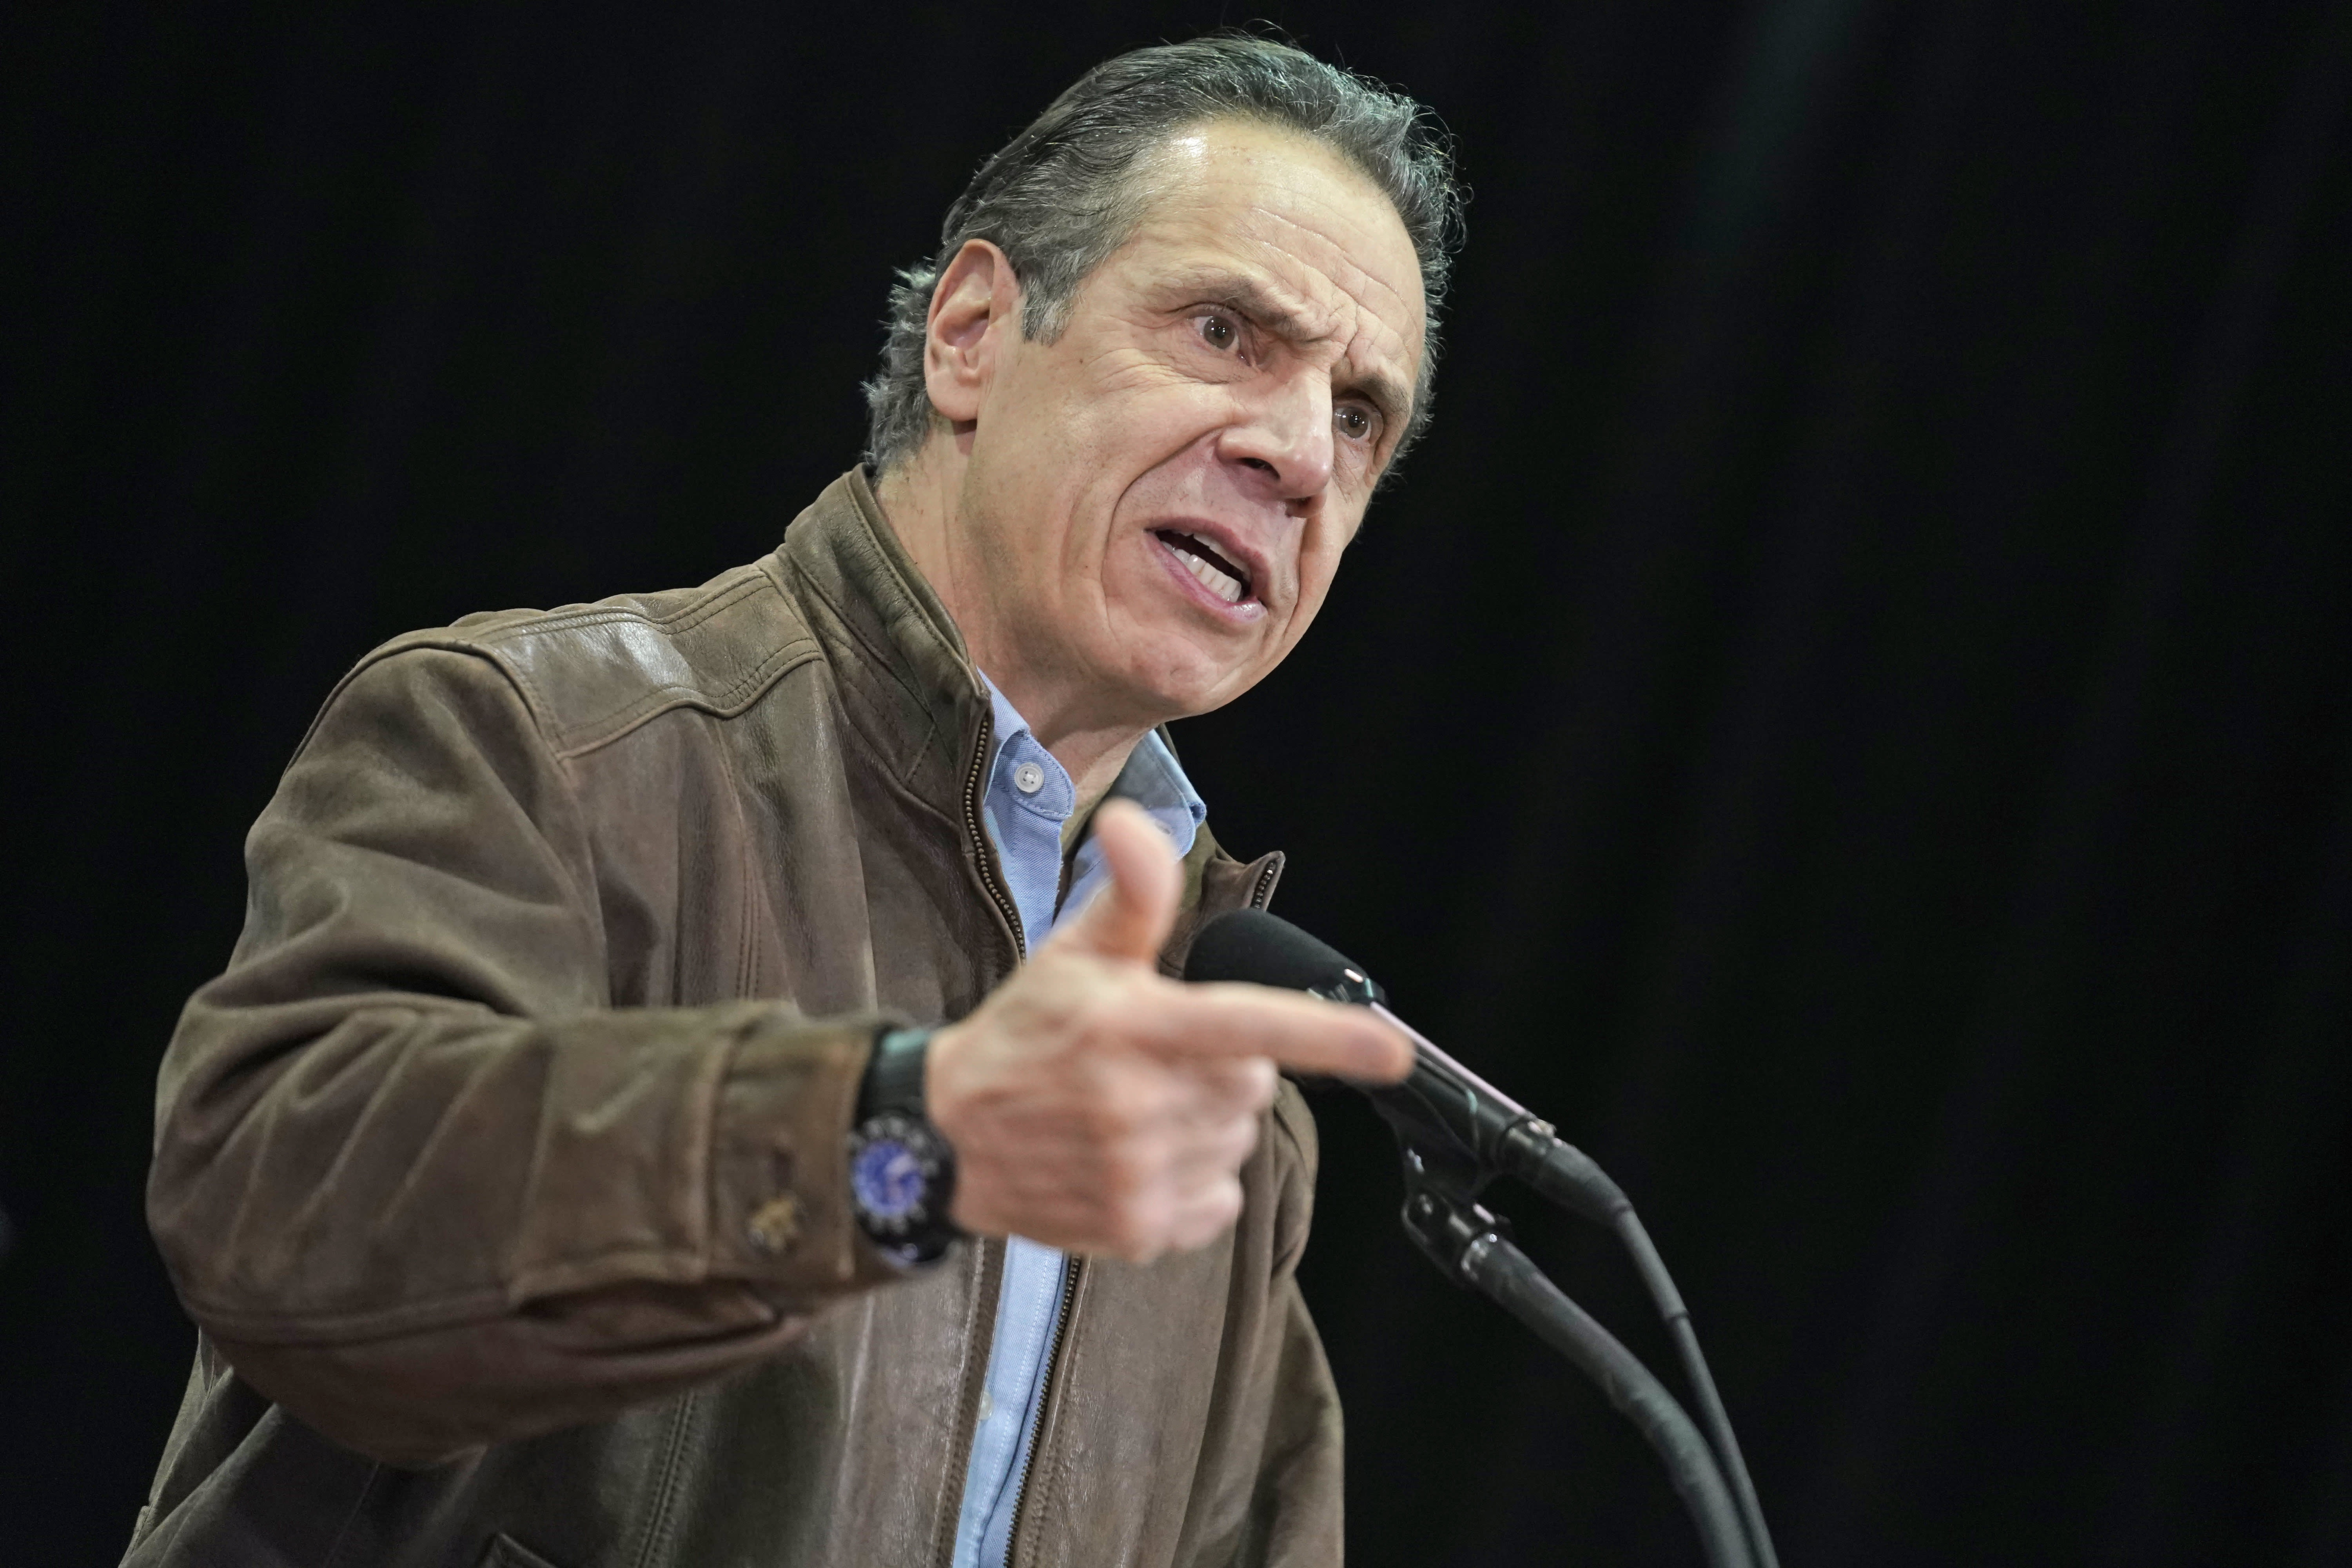 Cuomo supporters interrupt fundraising during a sexual harassment scandal